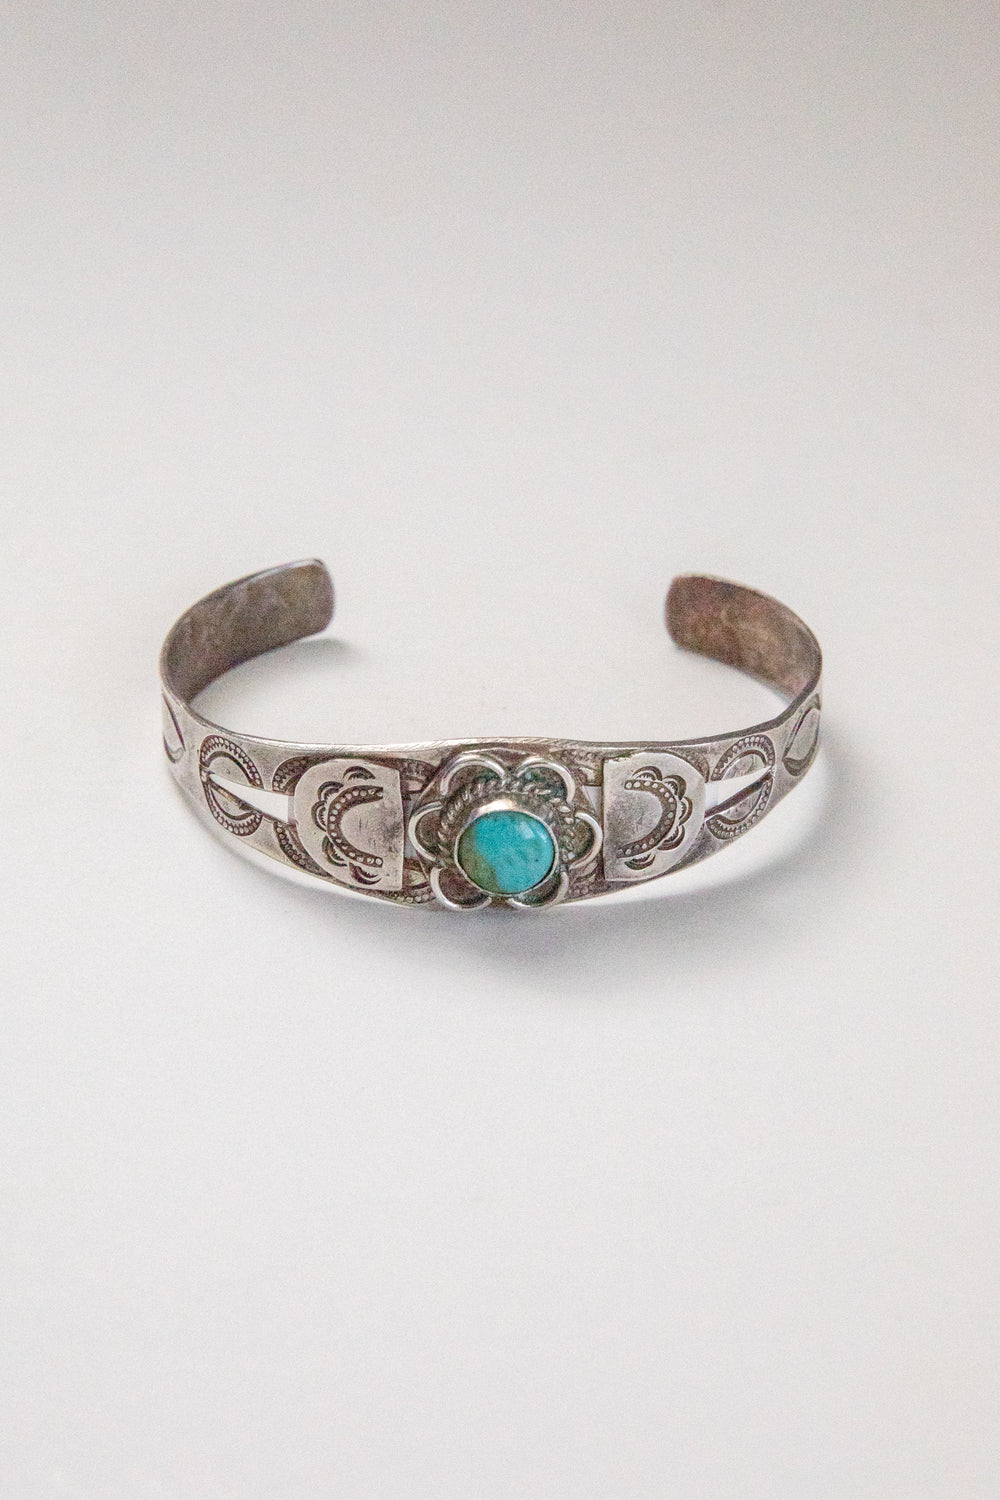 1930s Fred Harvey Turquoise Flower Cuff